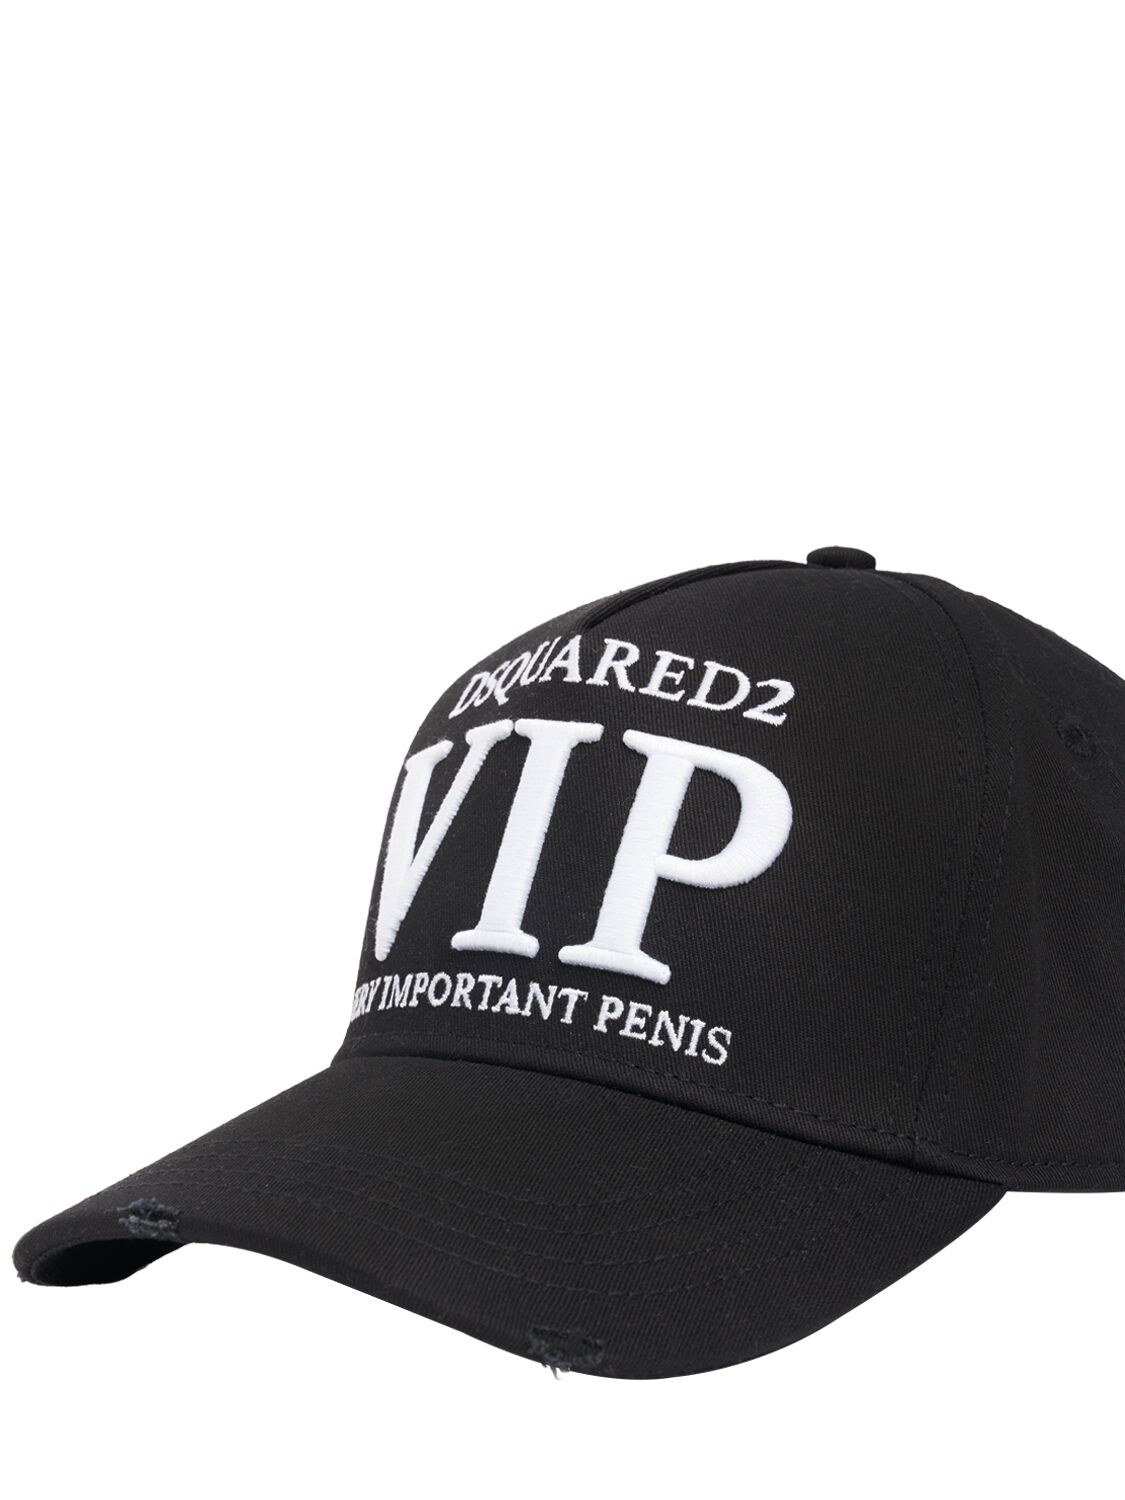 Shop Dsquared2 Vip Embroidered Baseball Cap In Black,white